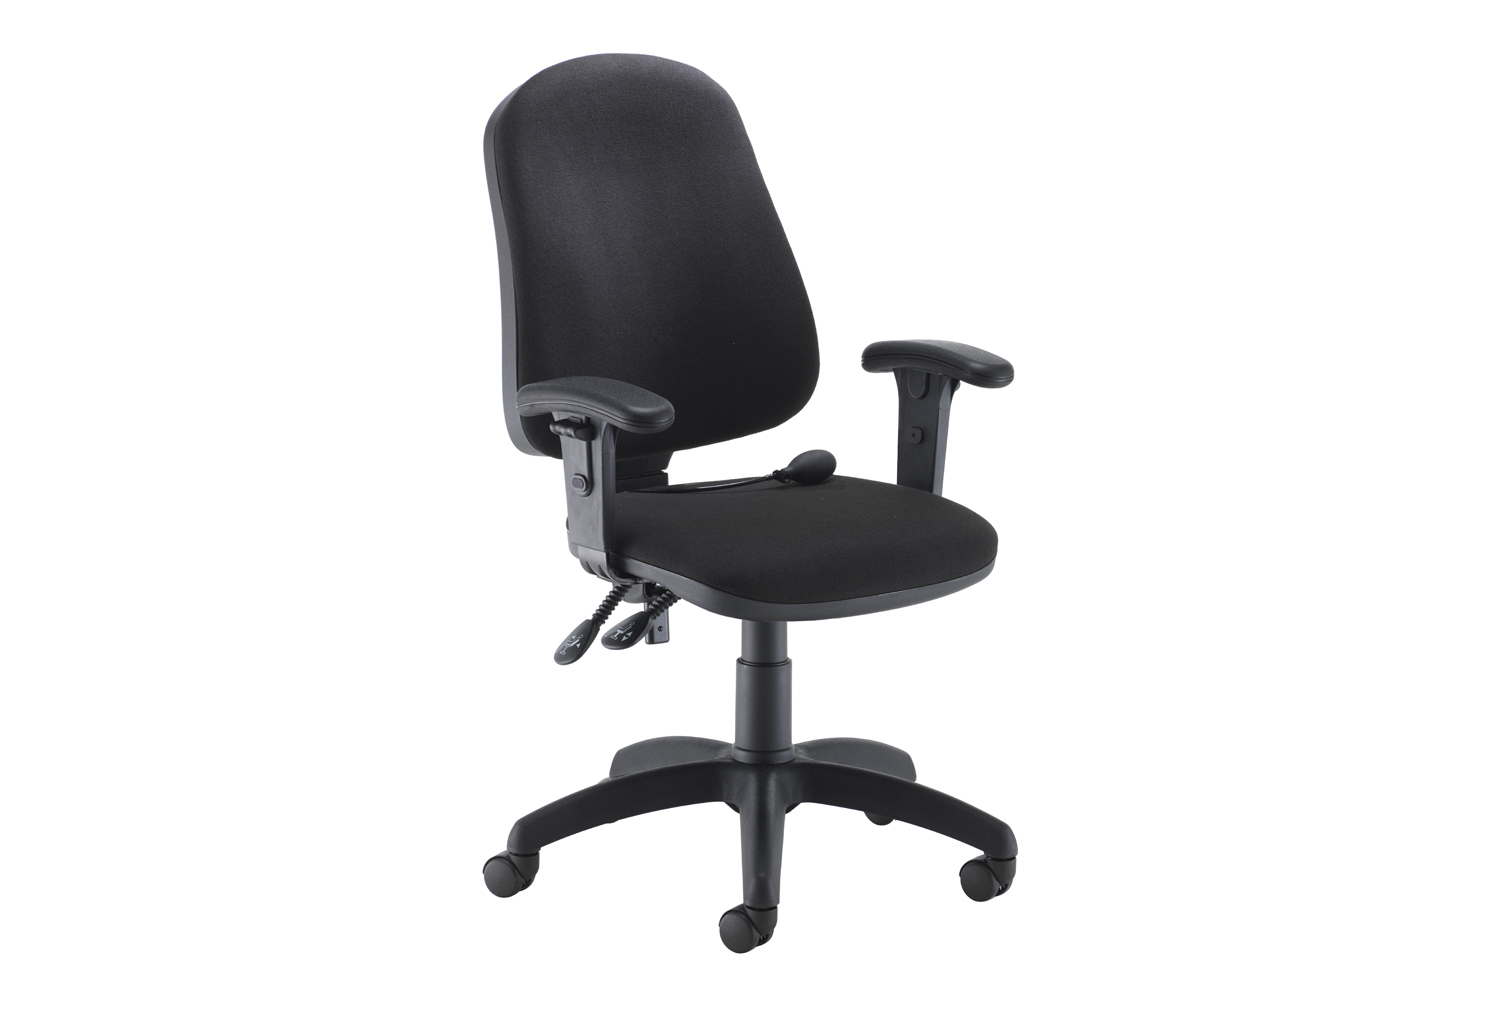 Orchid Lumbar Pump Ergonomic Operator Office Chair With Height Adjustable Arms, Black, Fully Installed